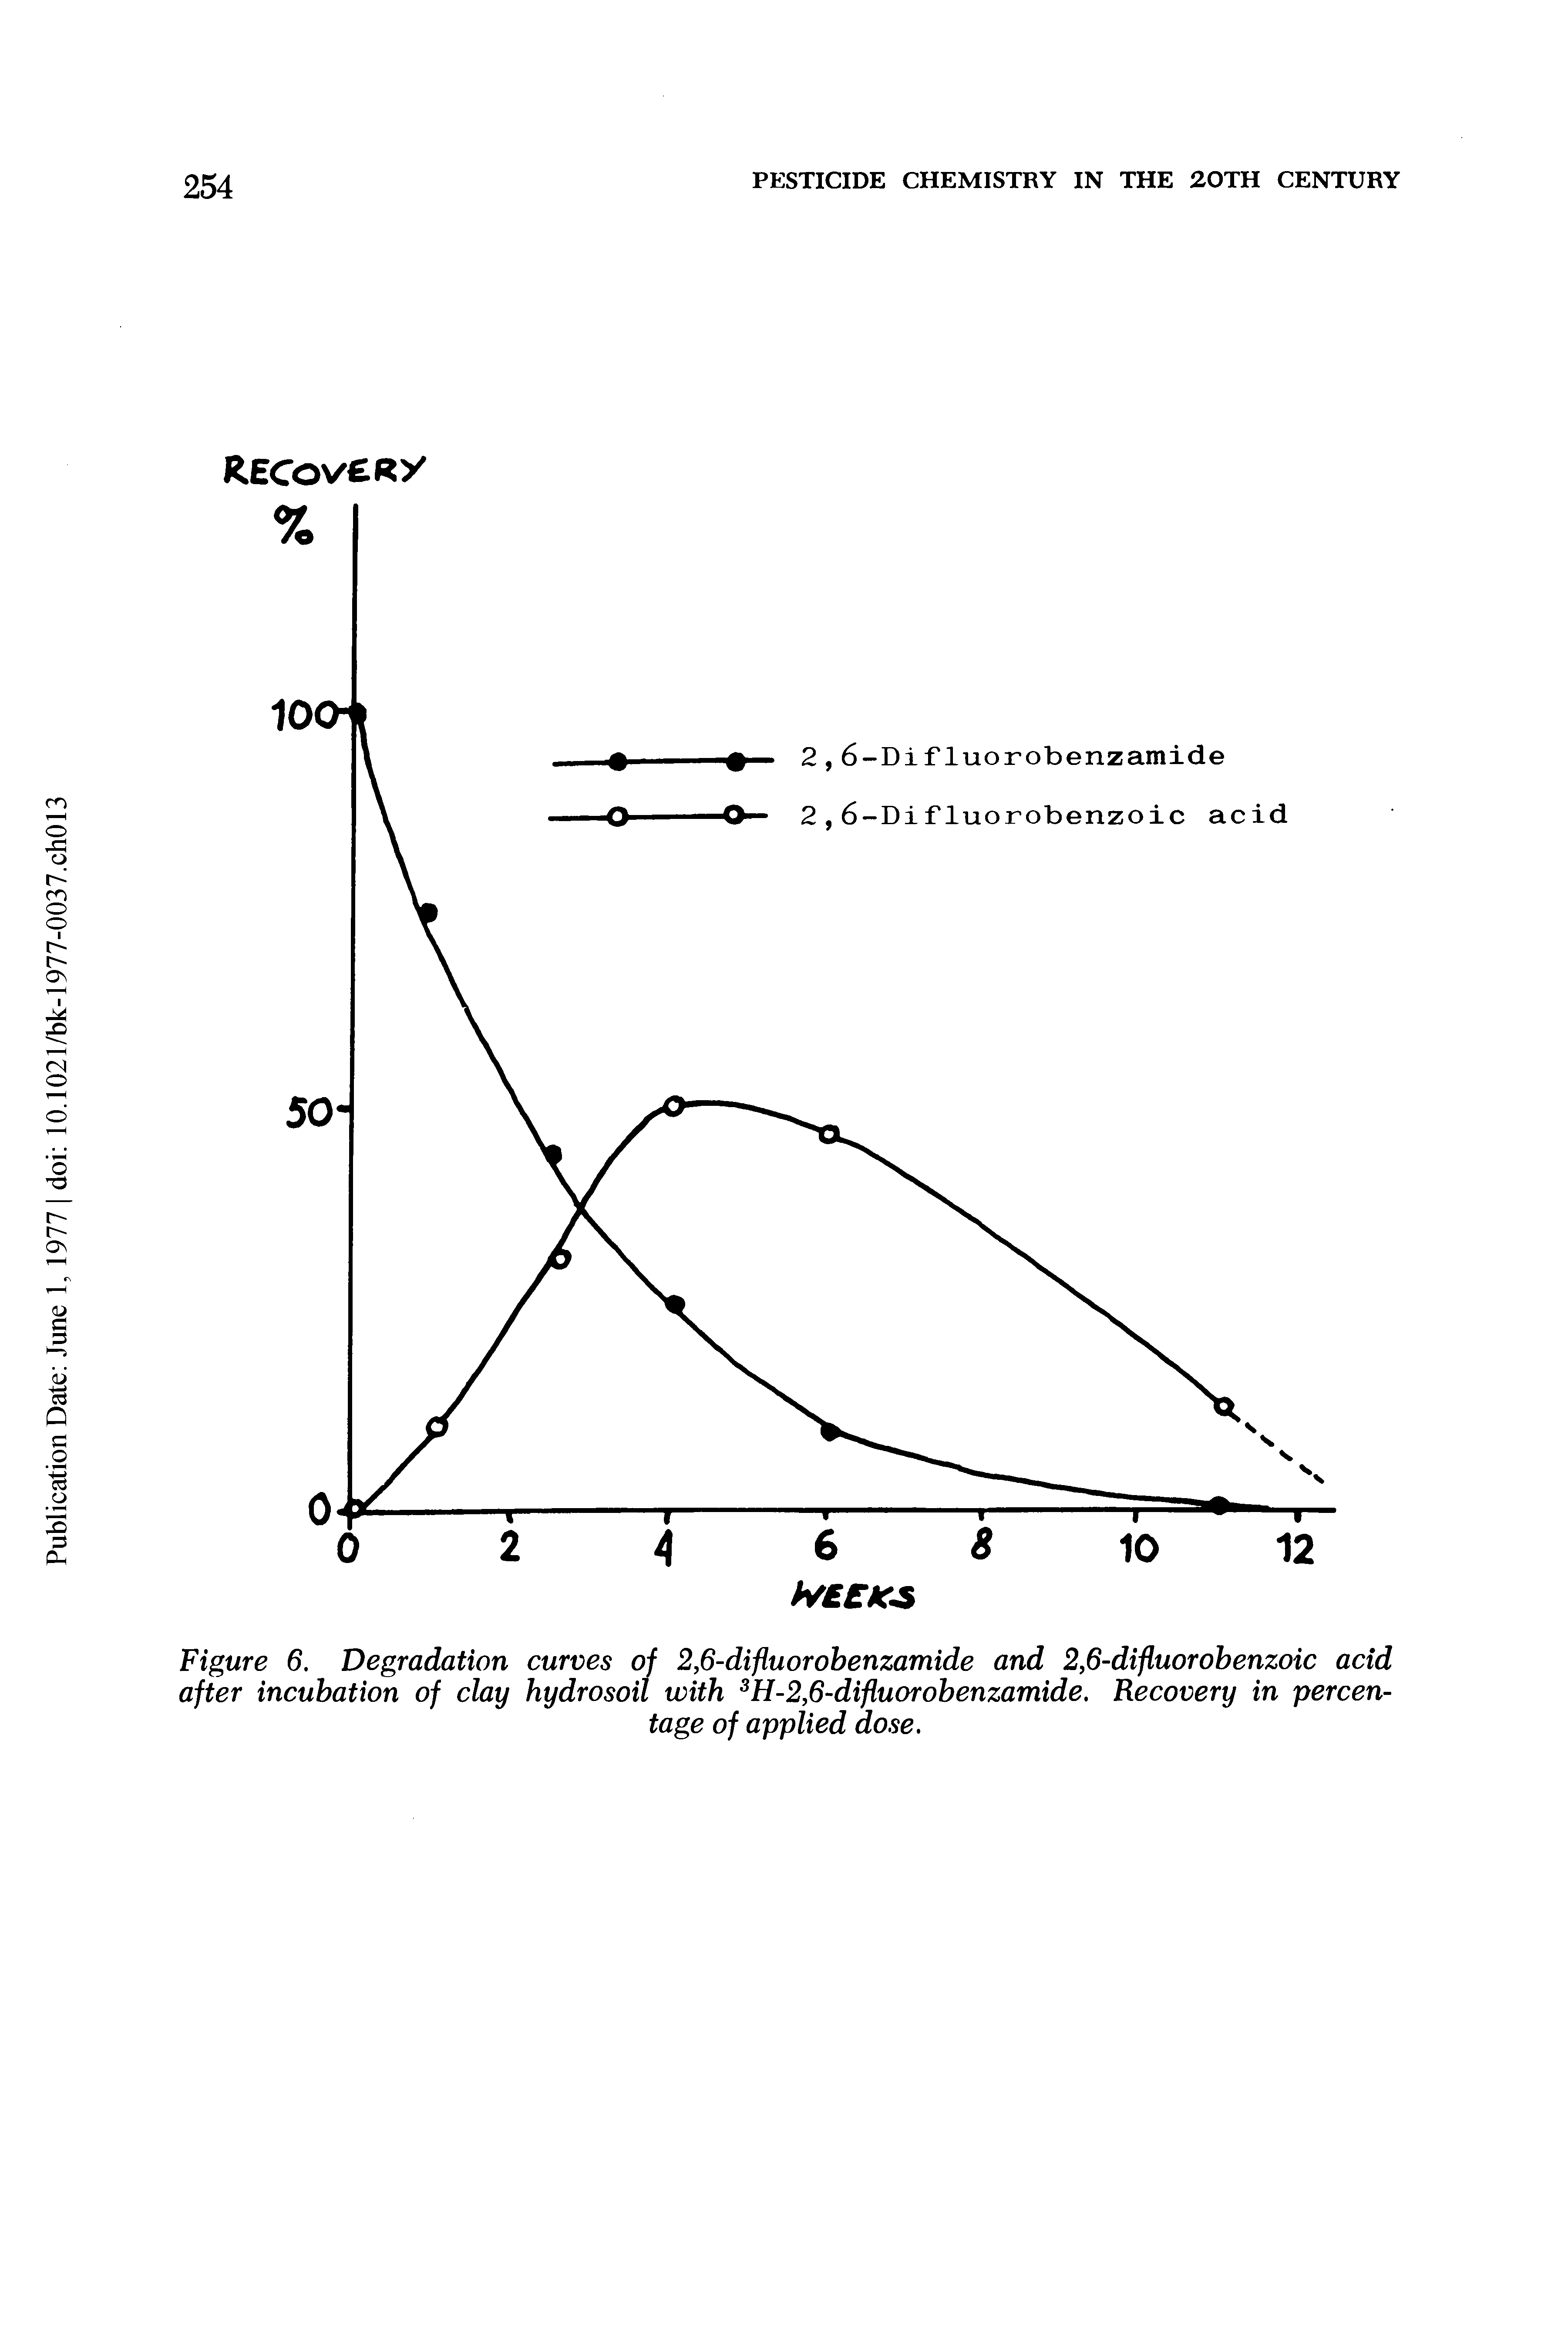 Figure 6. Degradation curves of 2,6-difiuorobenzamide and 2,6-difluorobenzoic acid after incubation of clay hydrosoil with 3H-2,6-difluorobenzamide. Recovery in percentage of applied dose.